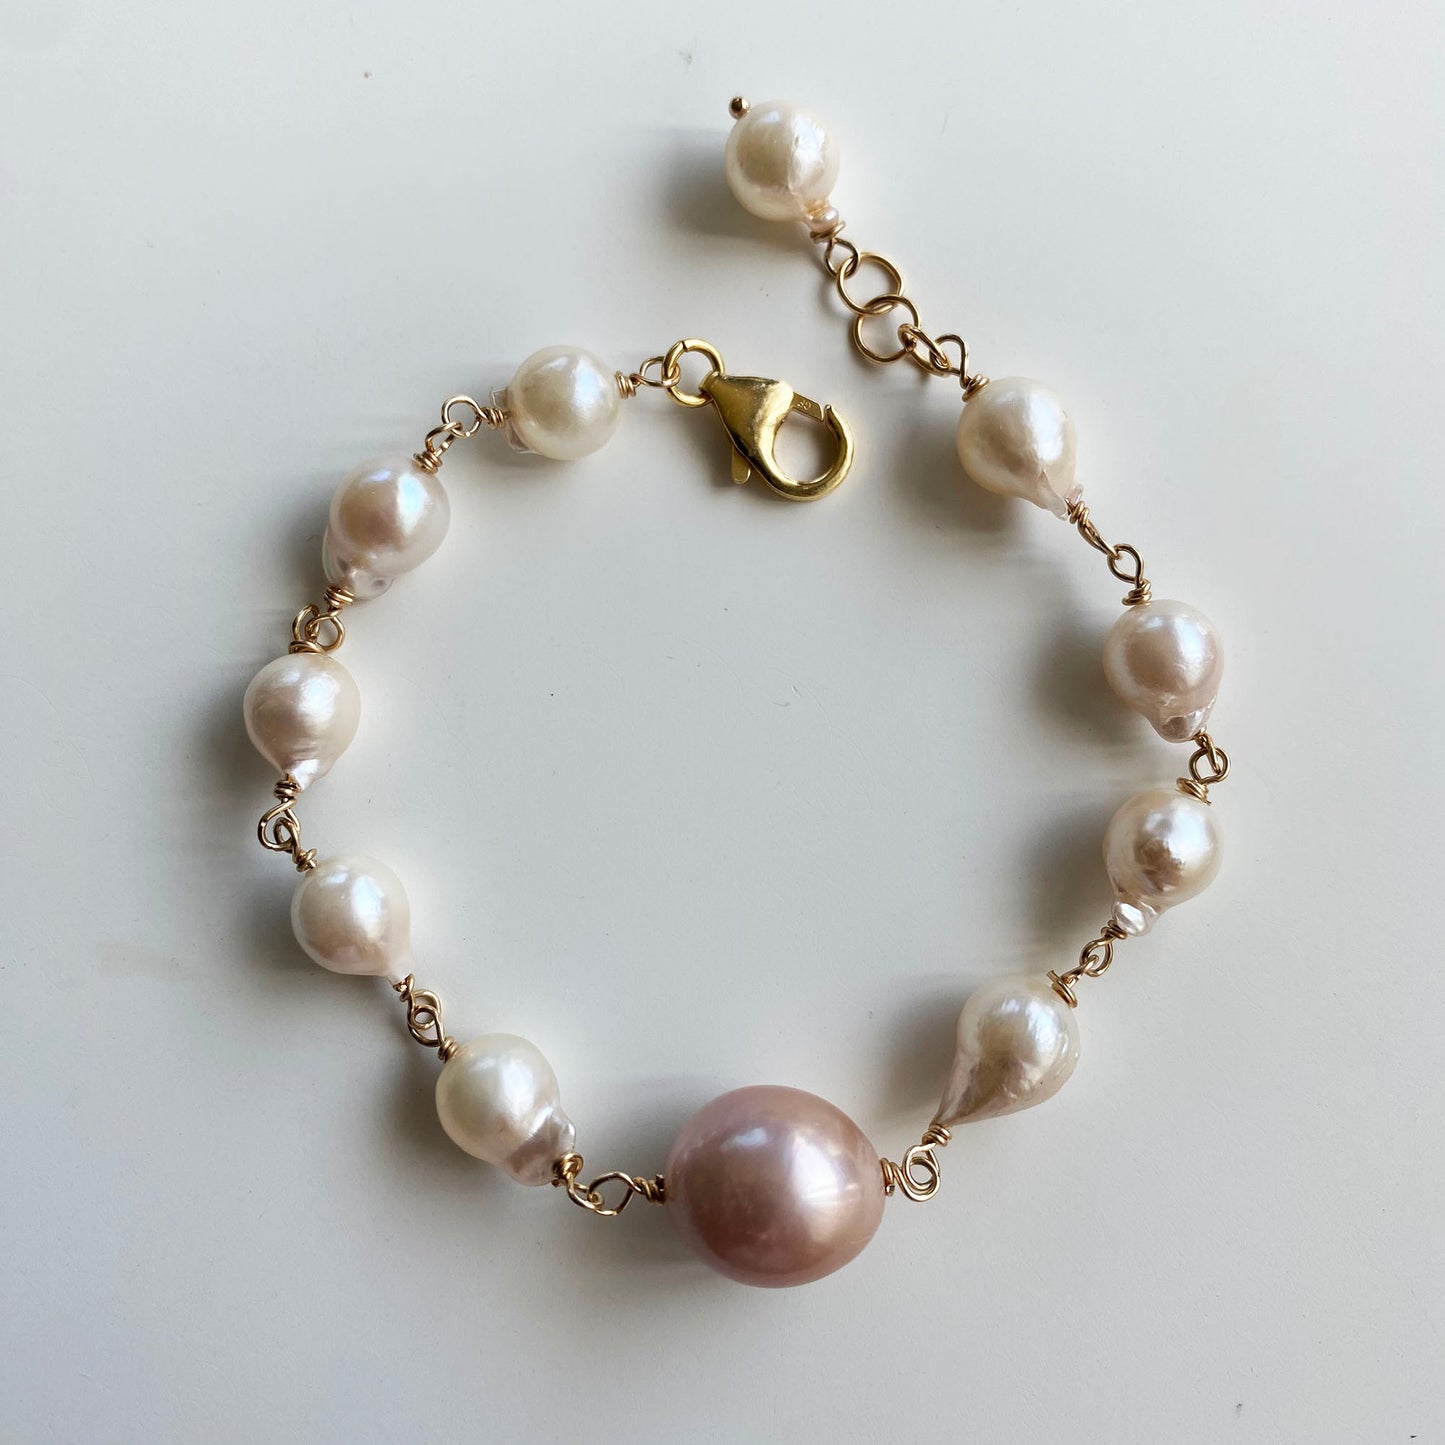 Dusty Peach Oval Freshwater with Creamy Akoyas Pearl Bracelet by Linda Queally